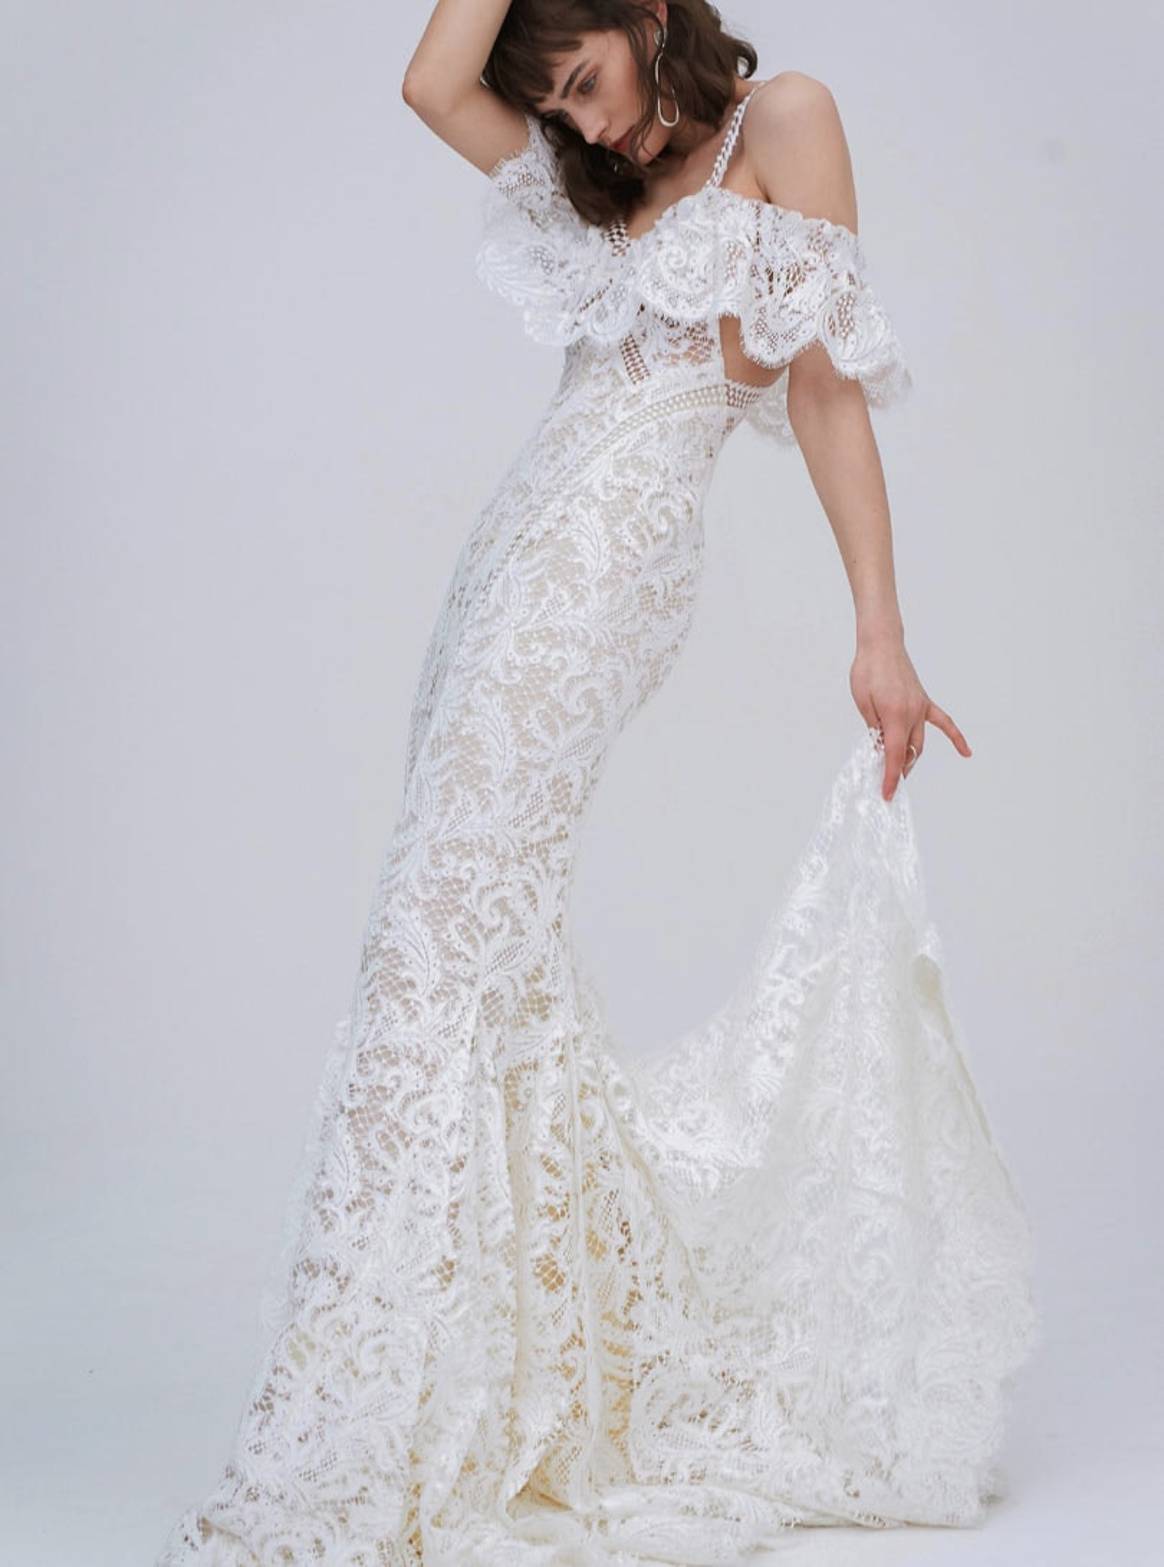 Galvan launches bridal collection